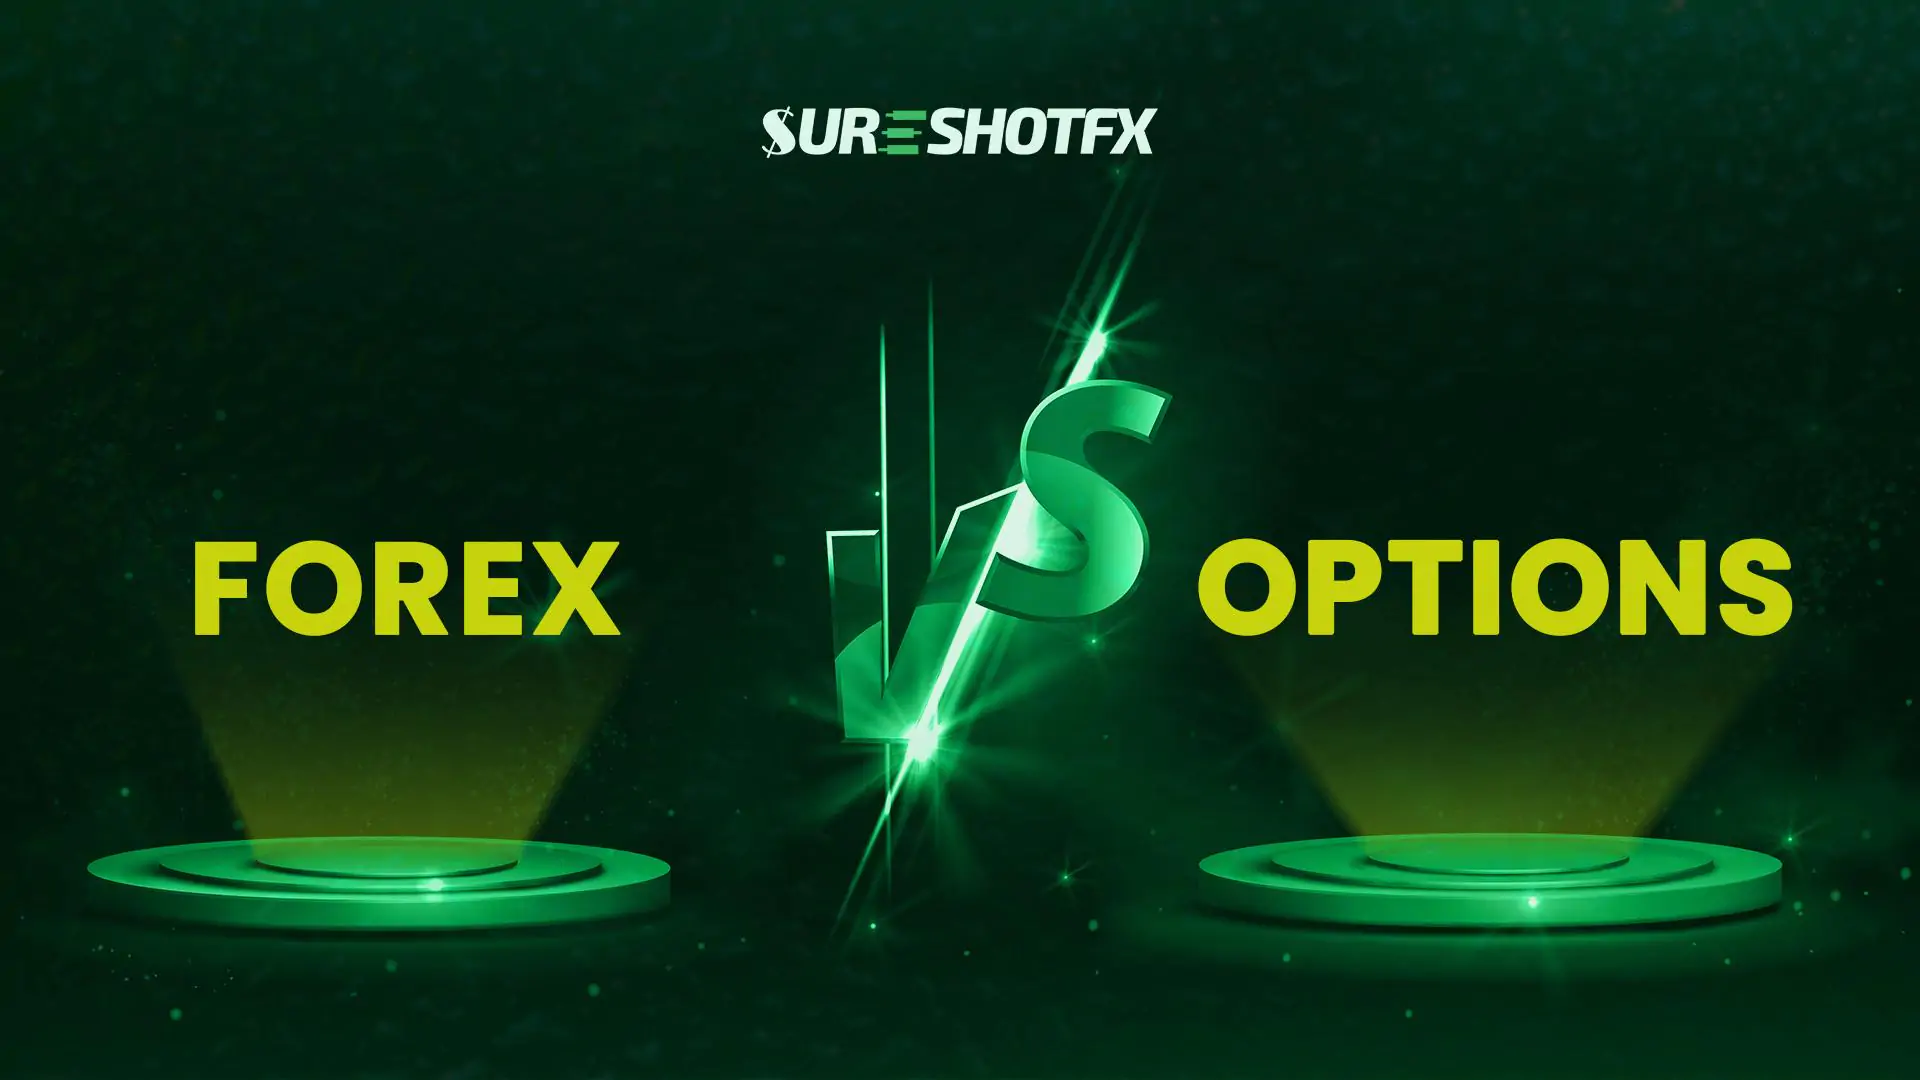 feature image of forex vs options trading showing a comparison.